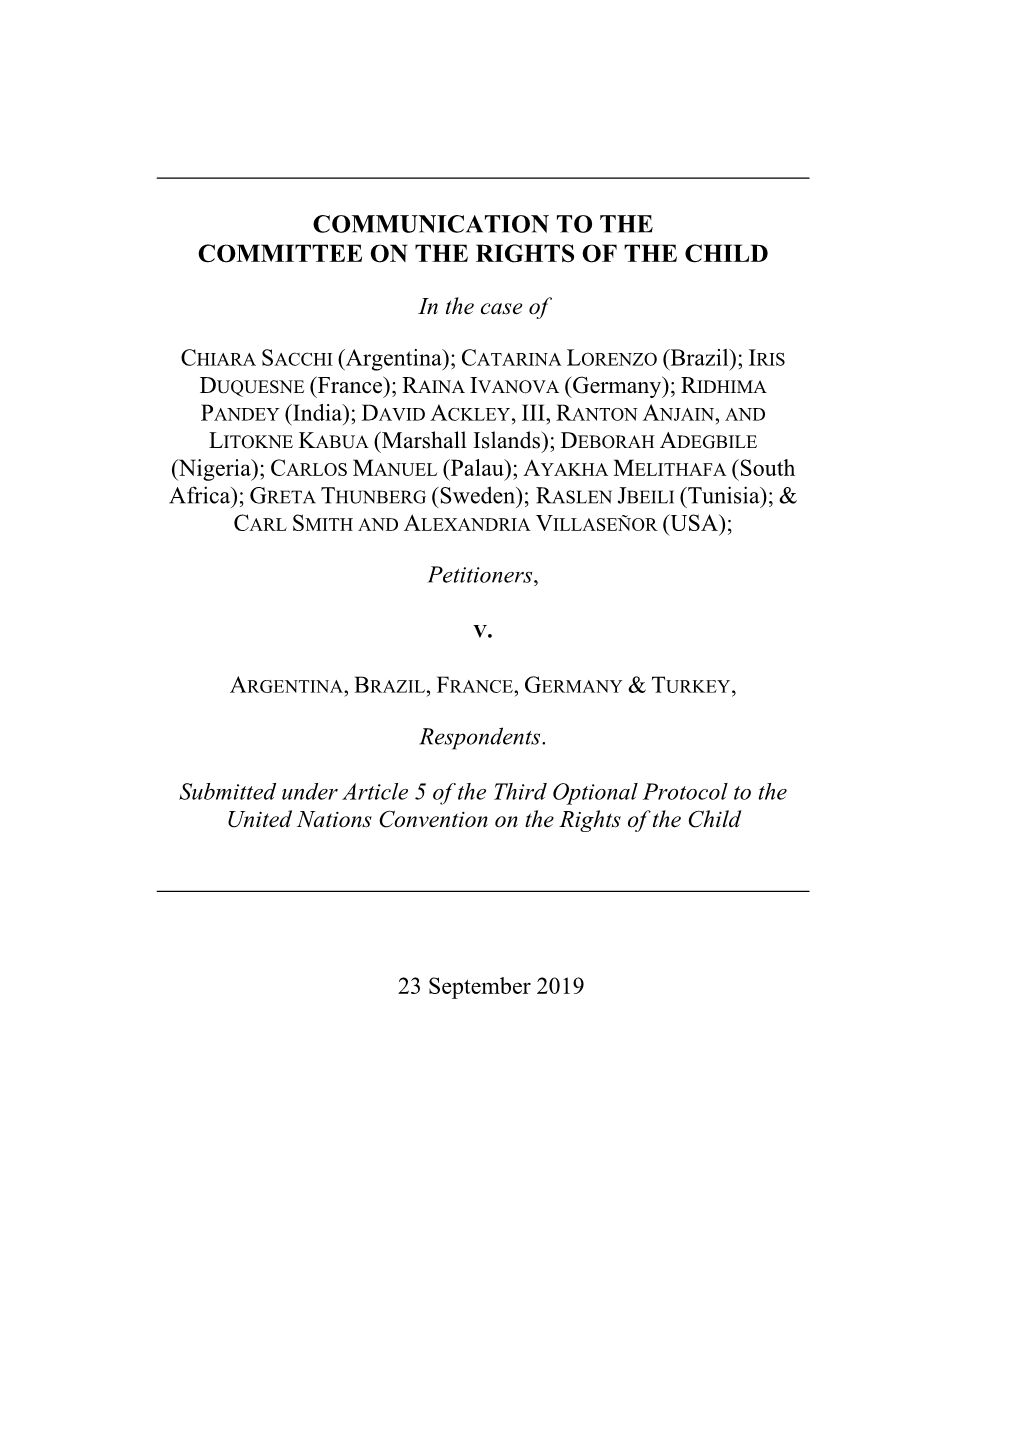 Communication to the Committee on the Rights of the Child